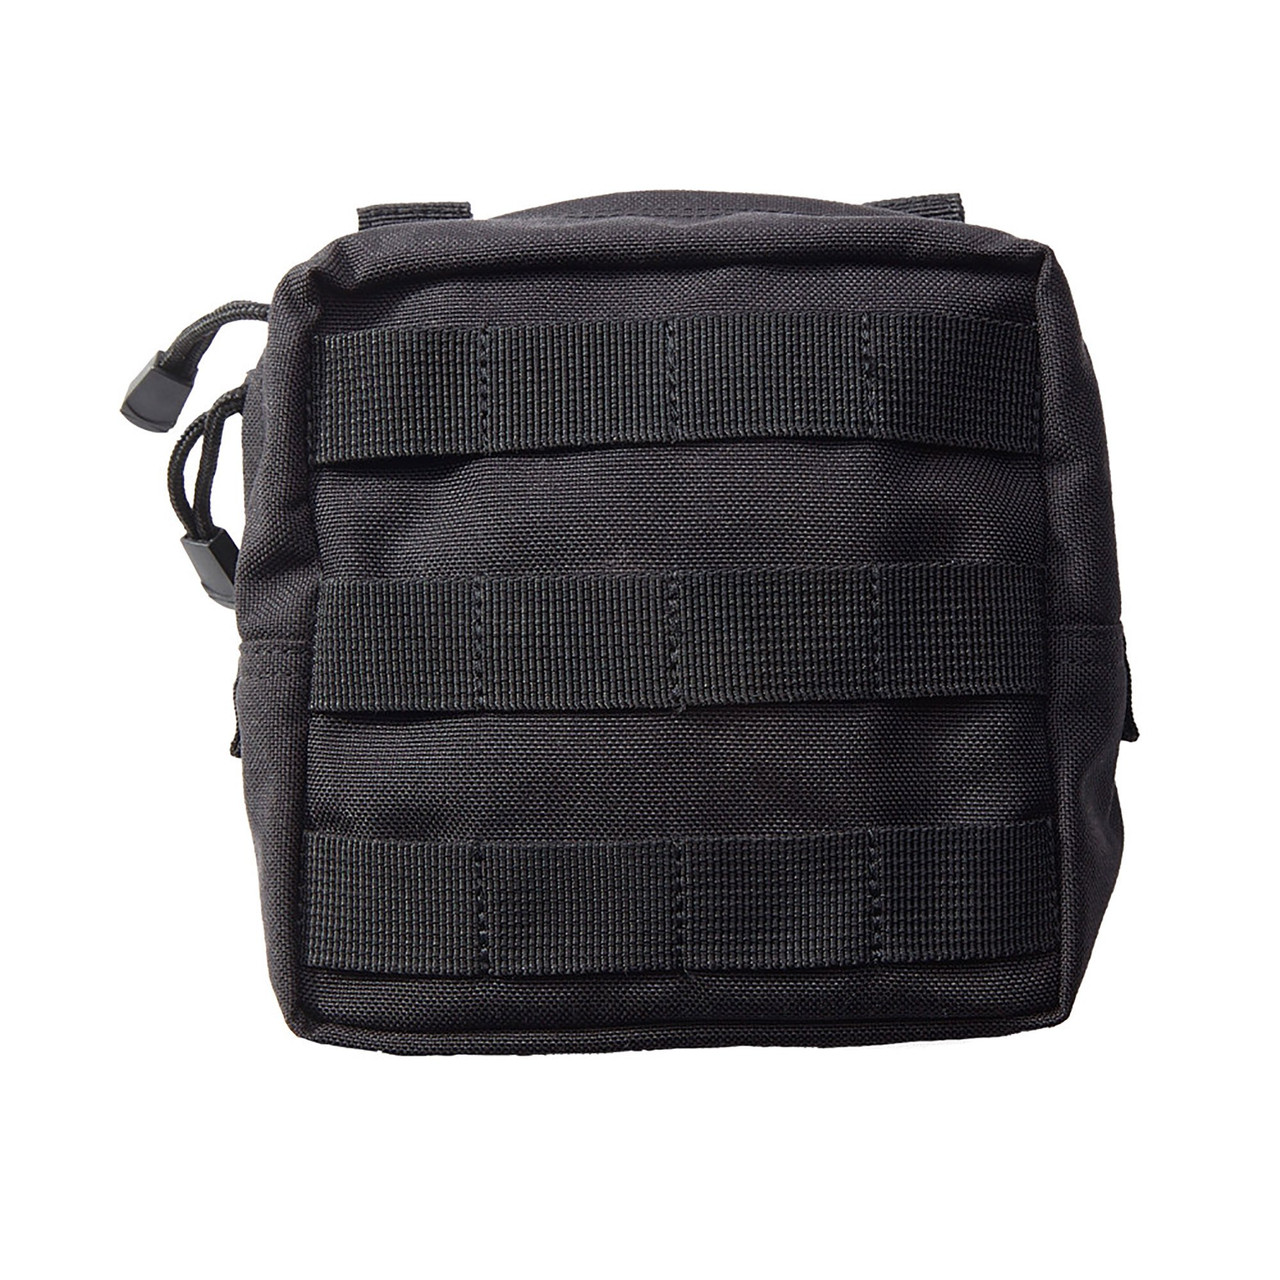 Molle Flexi Pouch  Dog Storage - Ray Allen Manufacturing